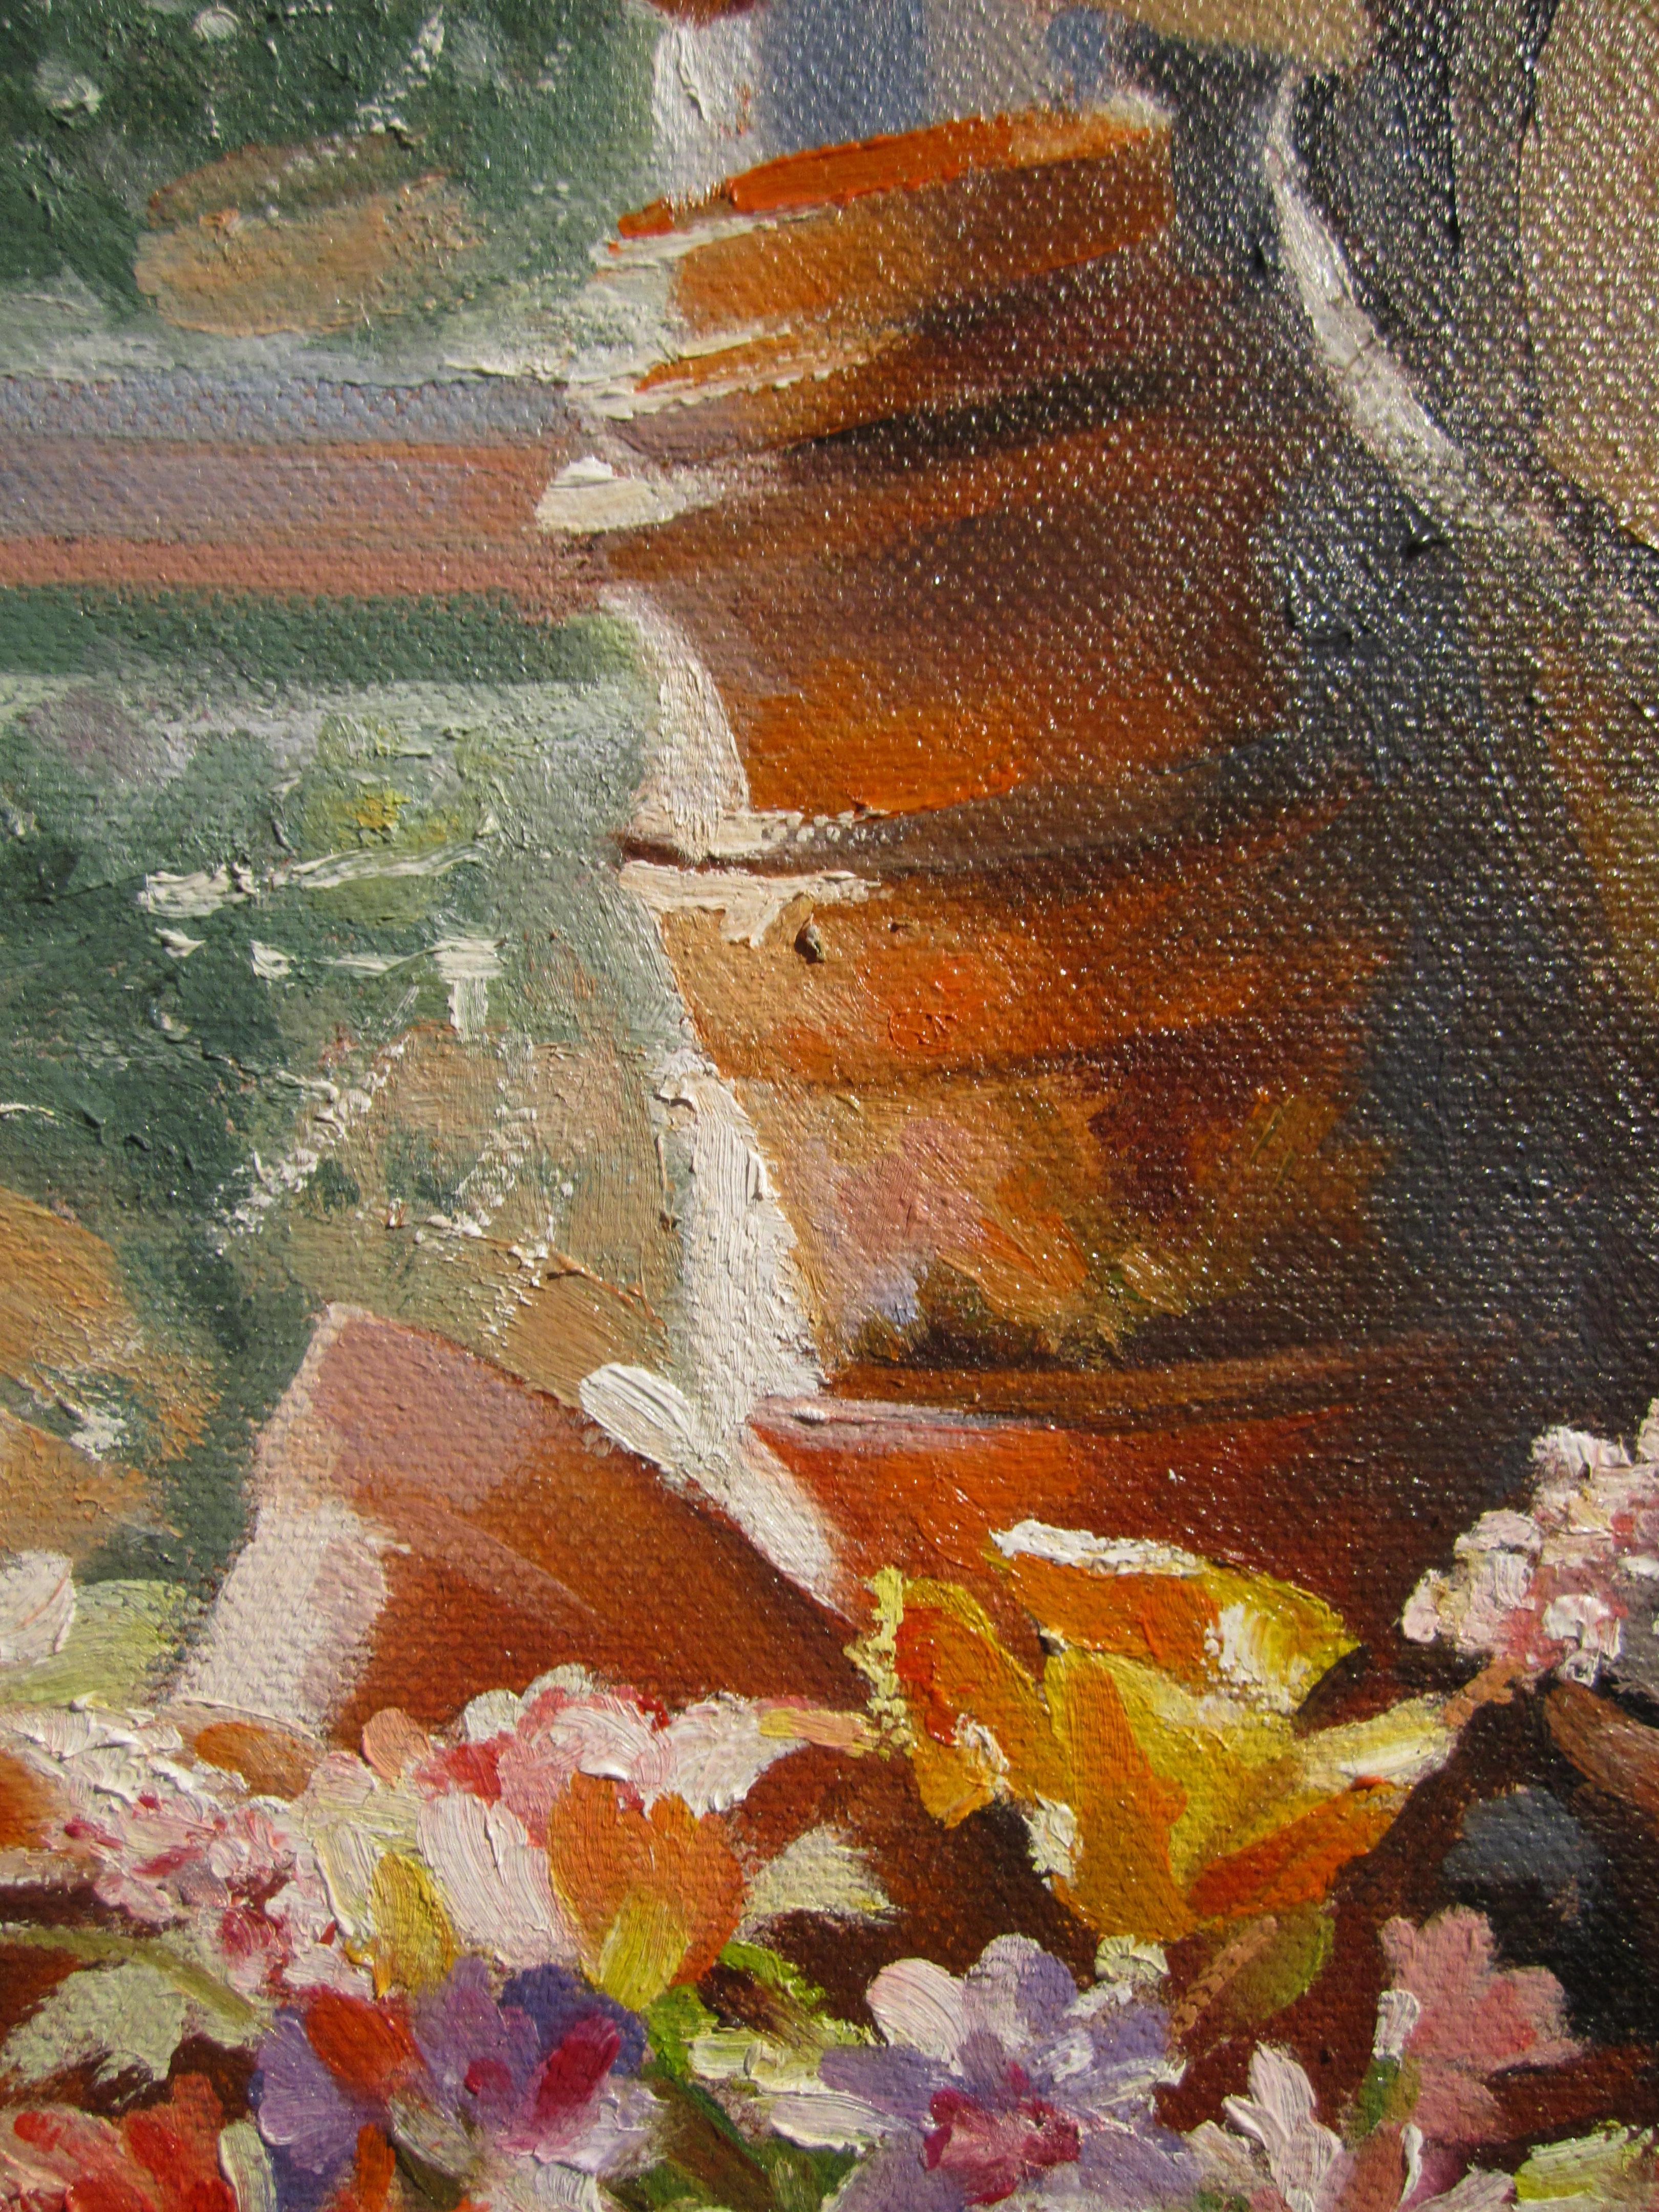 'Californian Poppies' is a vibrant and tranquil piece. Faulkner has captured the beautiful flowers perfectly and the light is almost dreamlike. An amazing still life that would make an amazing addition to any collection. 

Born in Britain in 1952,